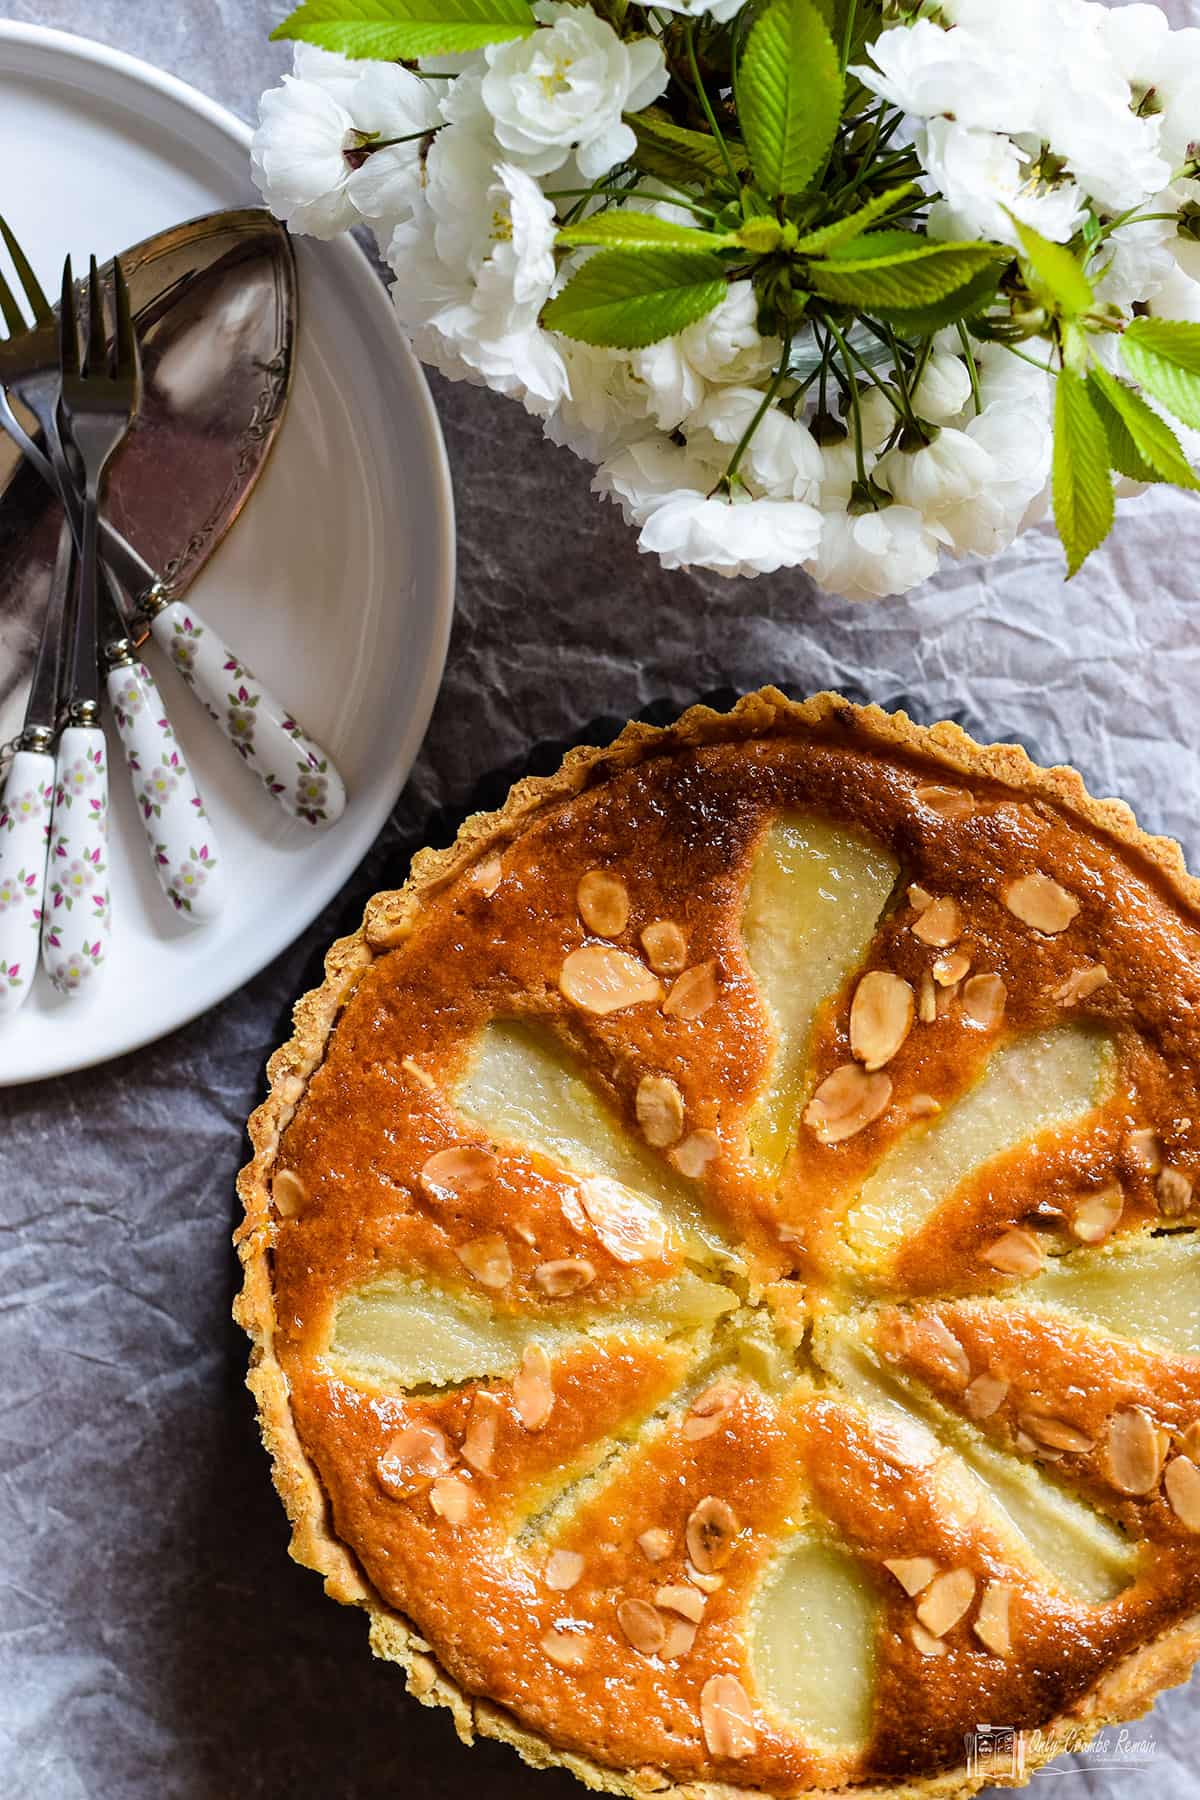 Pear and almond tart with plate of cutlery and vase flowers above.